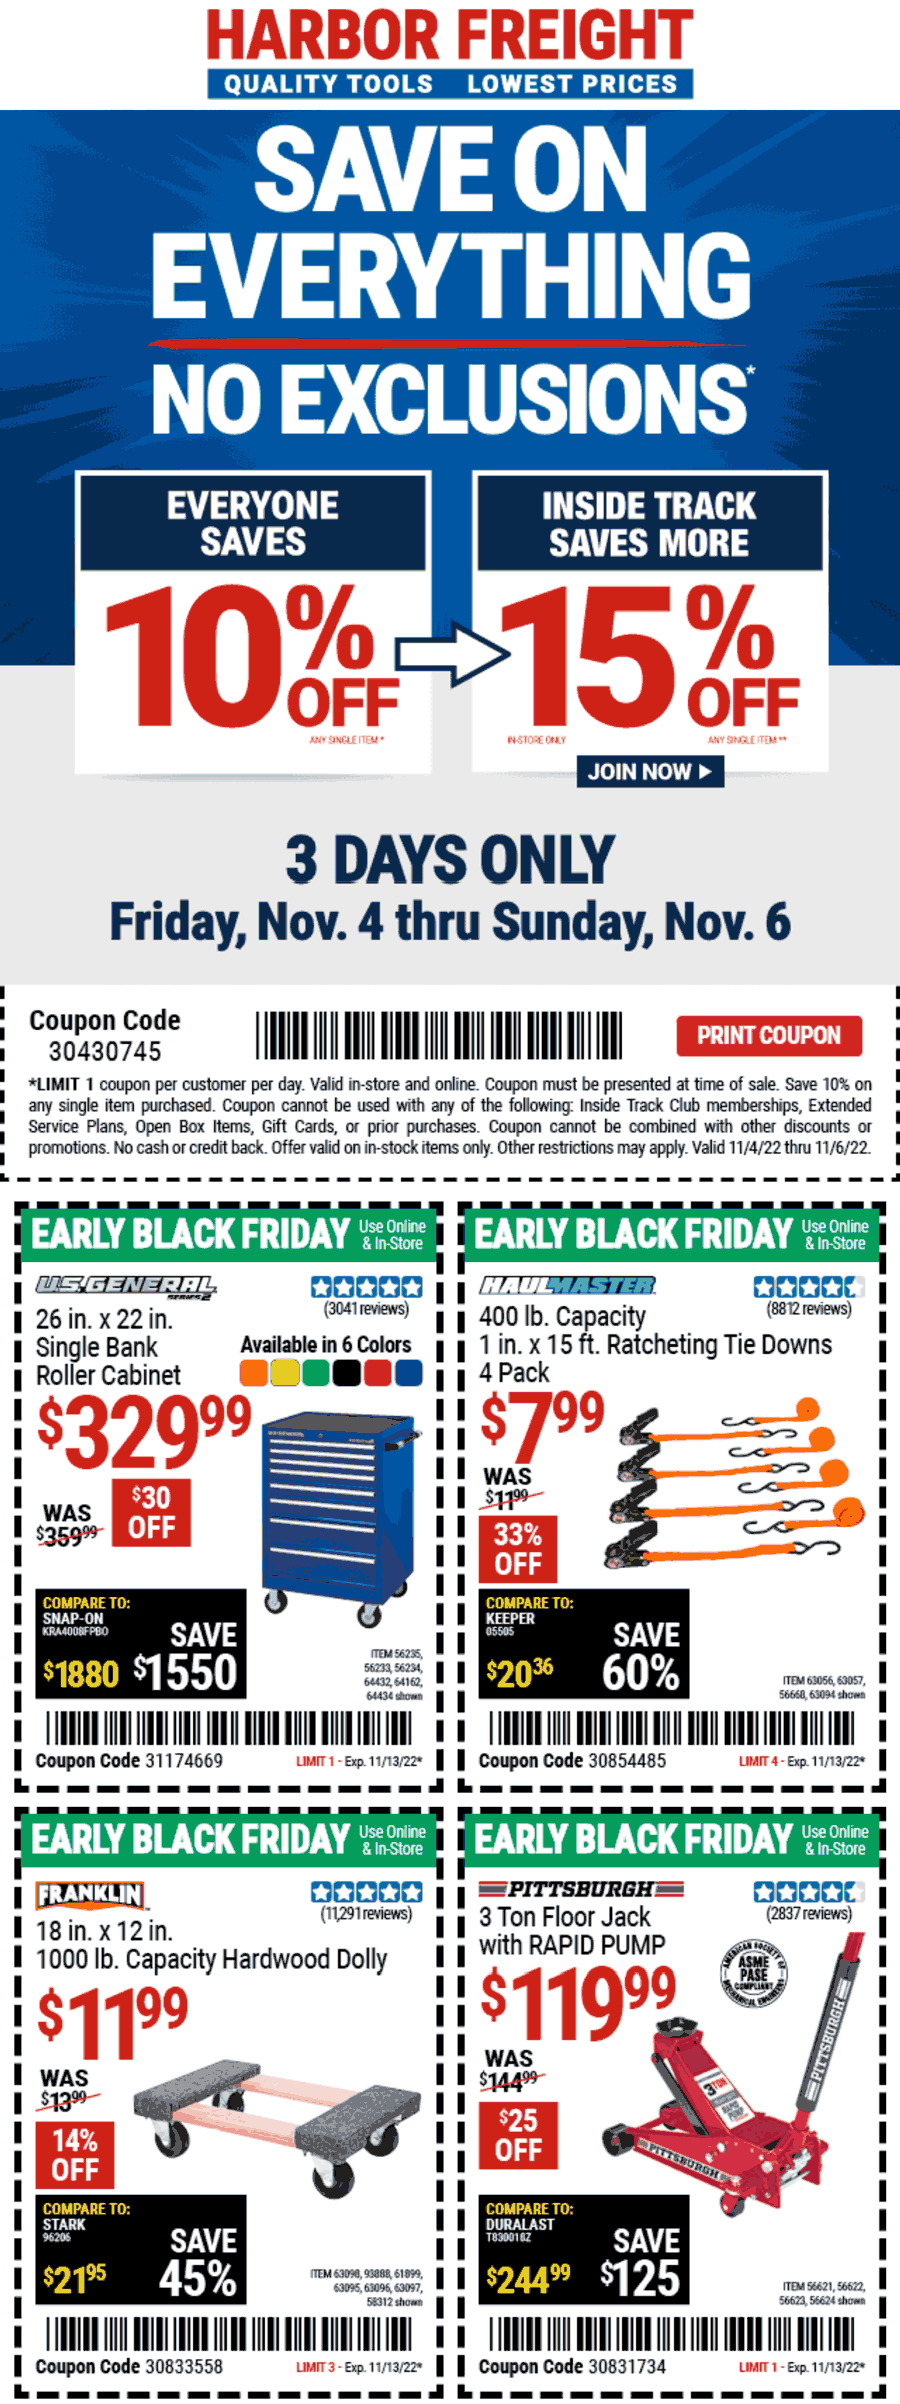 Harbor Freight stores Coupon  10% off everything at Harbor Freight Tools, or online via promo code 30430745 #harborfreight 